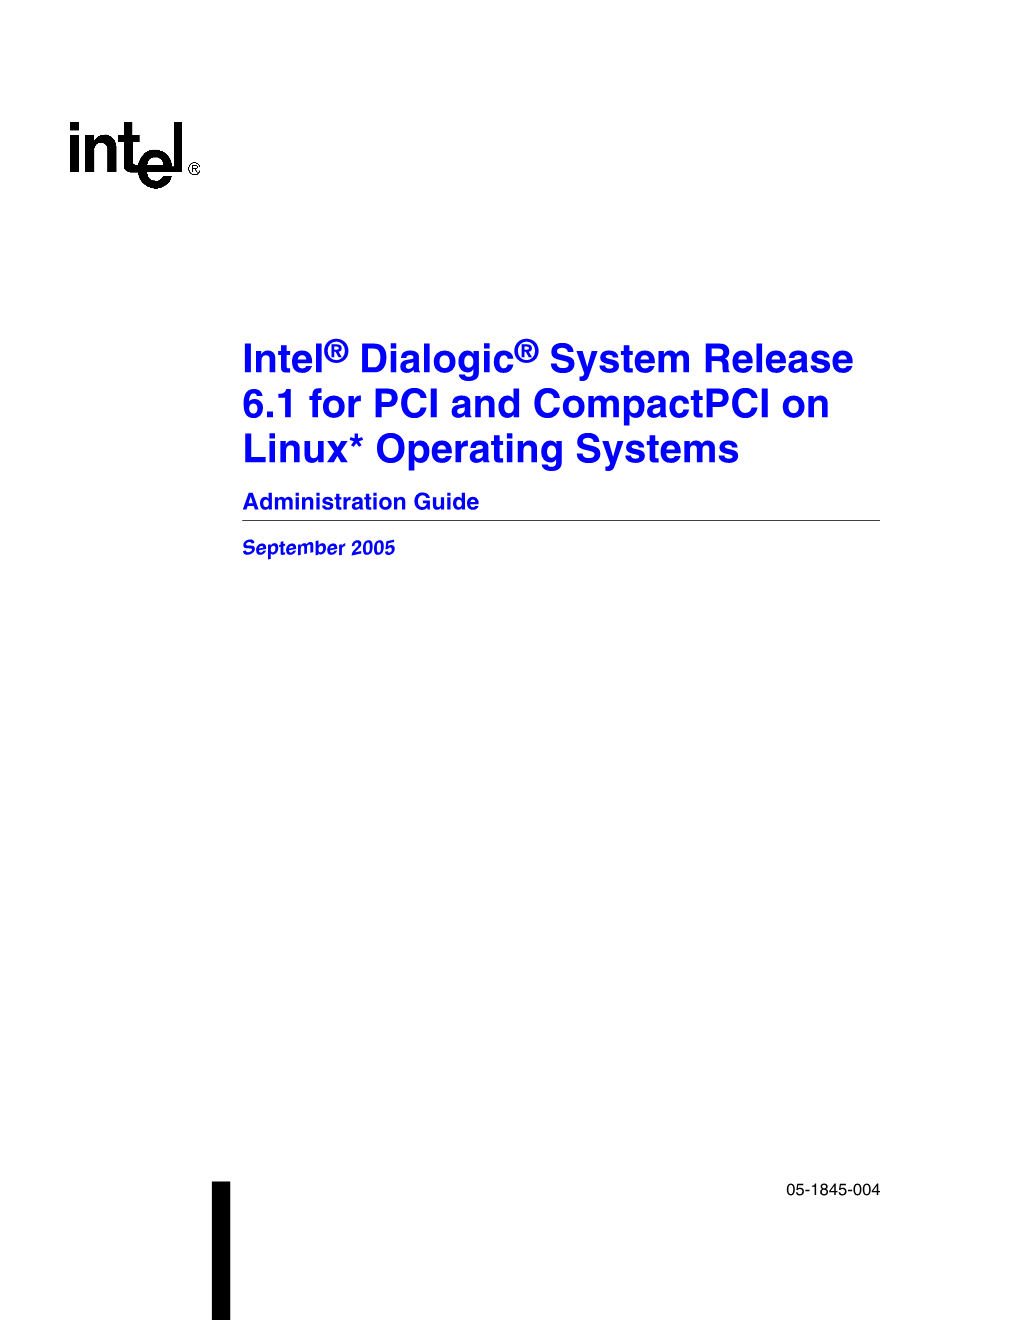 Intel Dialogic System Release 6.1 for PCI and Compactpci on Linux